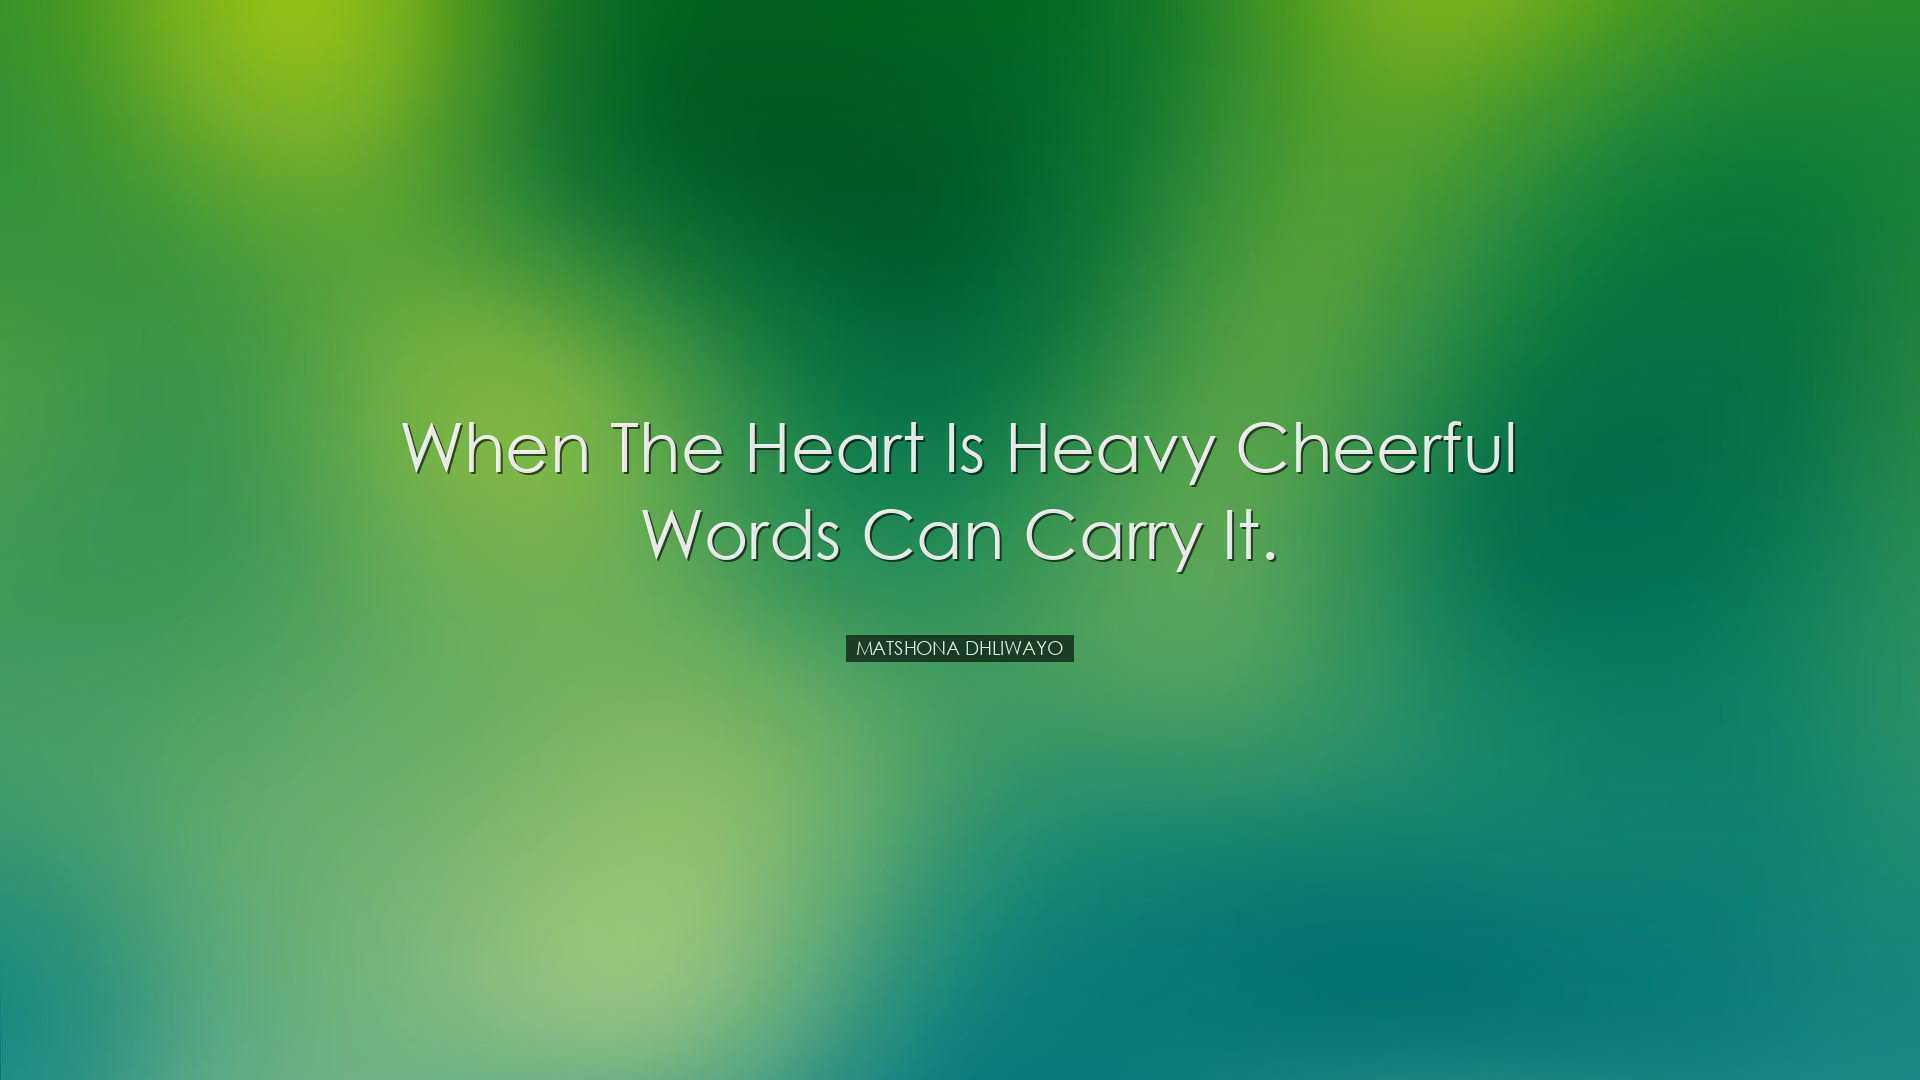 When the heart is heavy cheerful words can carry it. - Matshona Dh